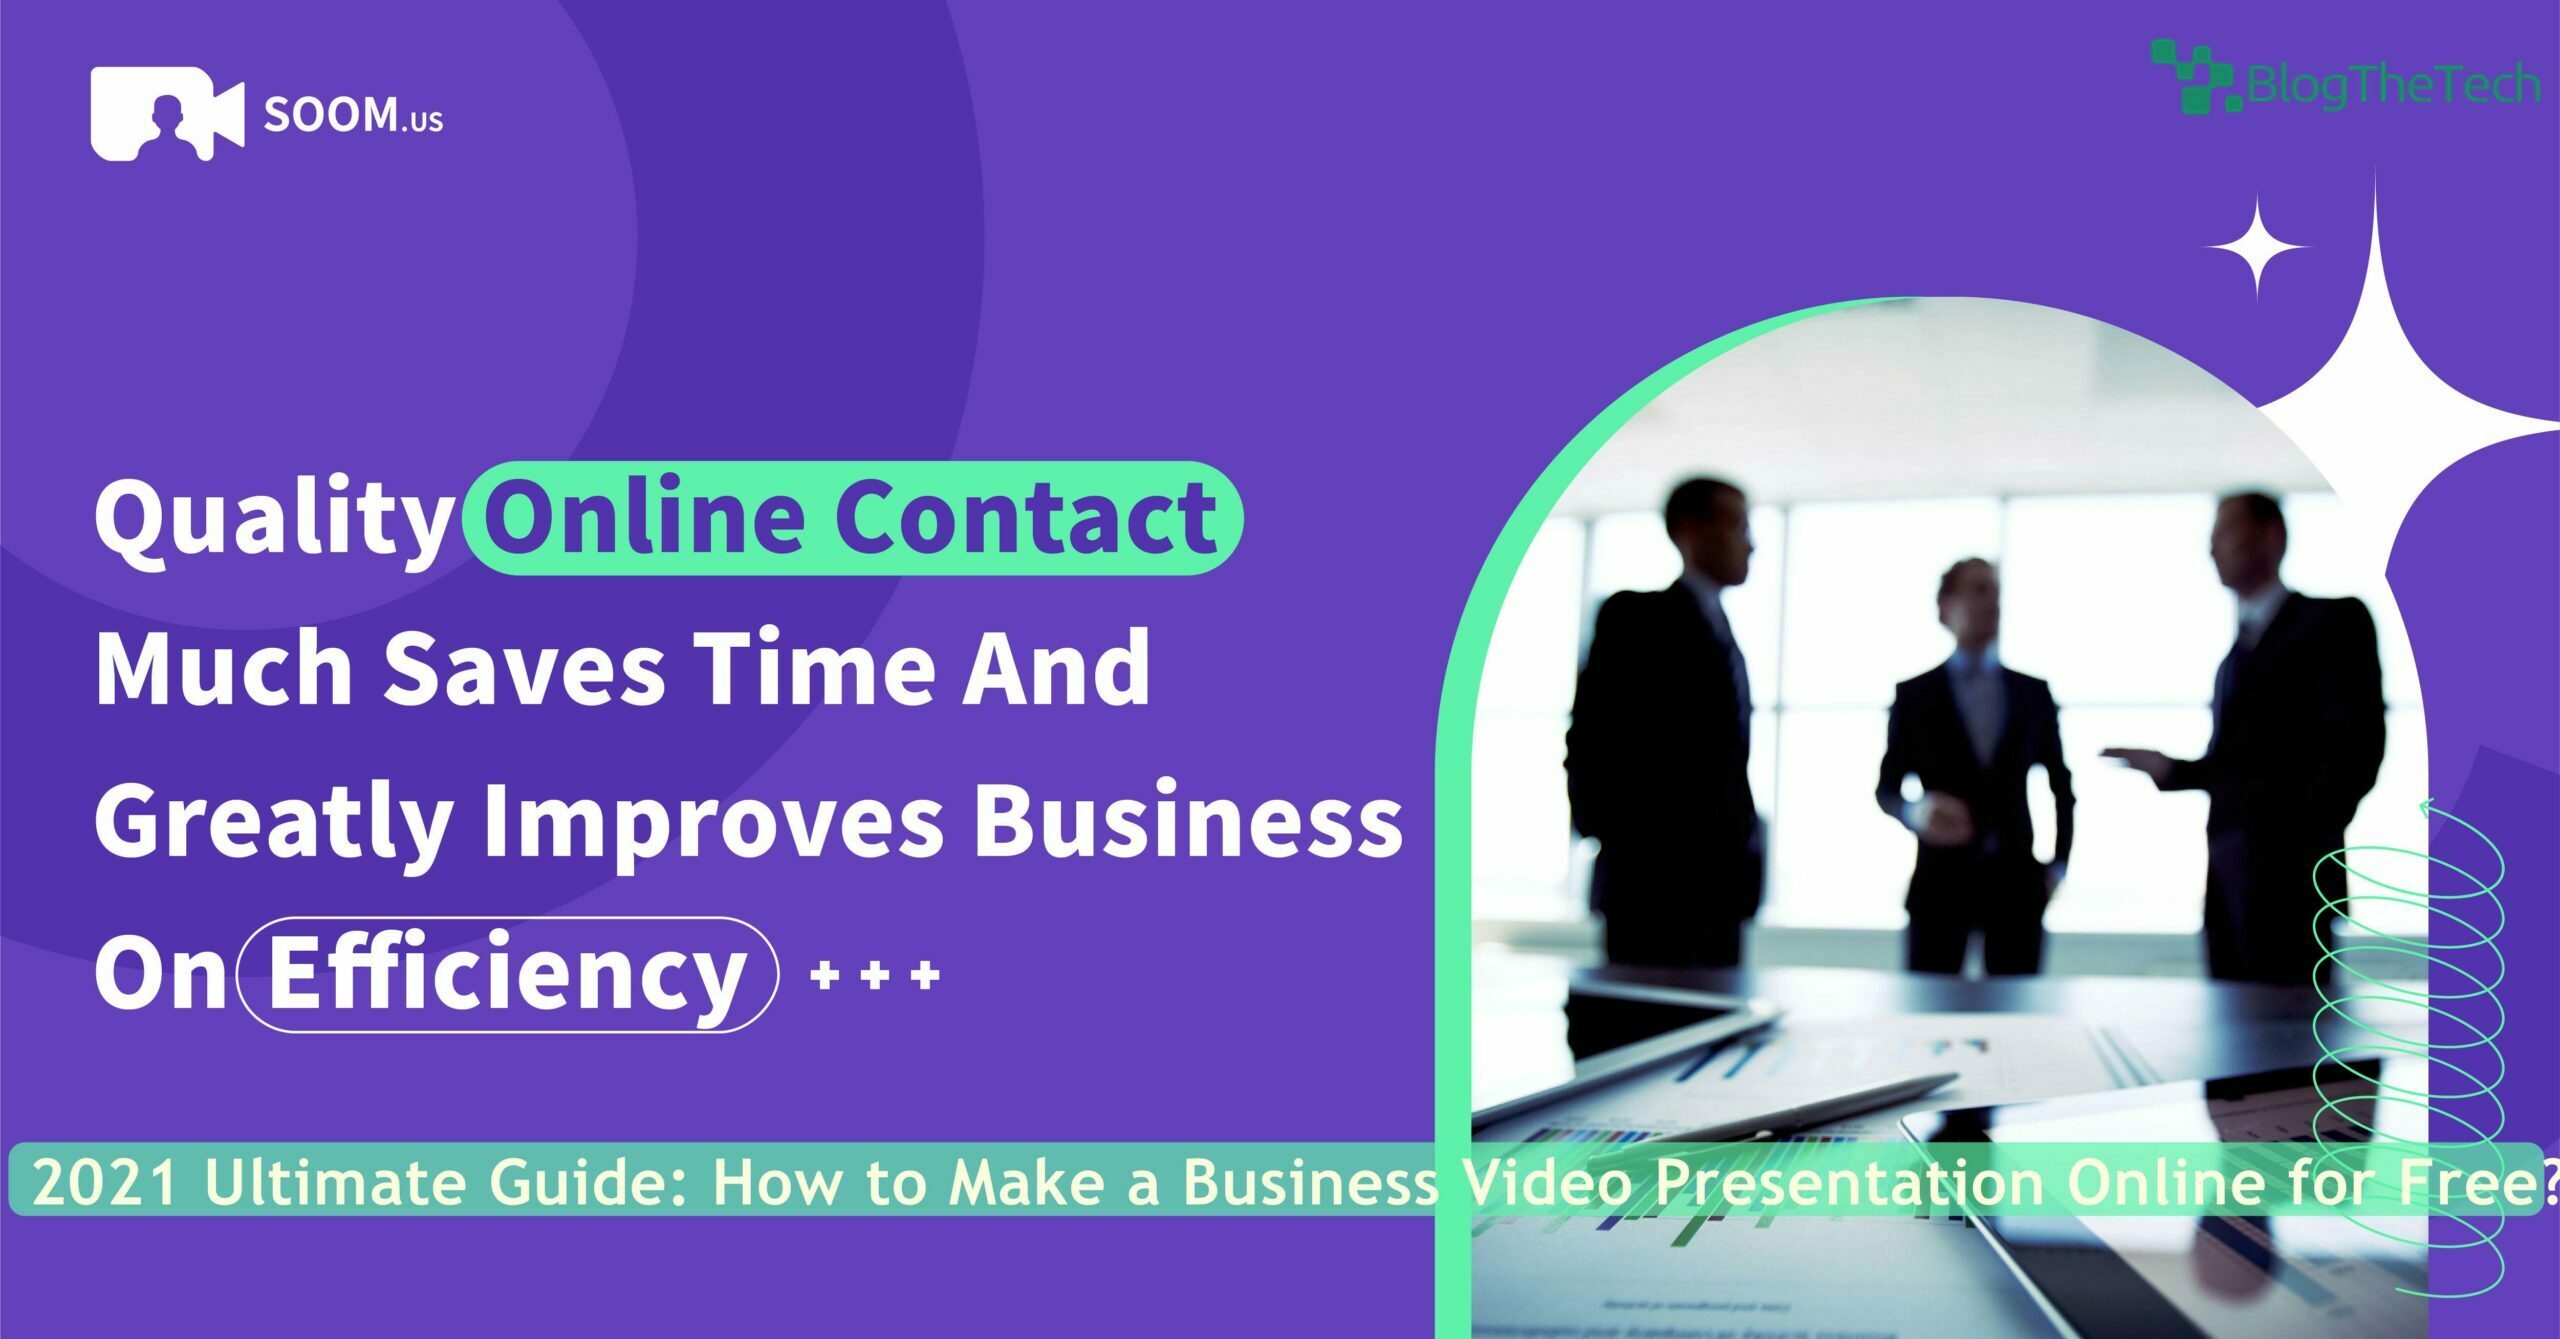 2021 Ultimate Guide: How to Make a Business Video Presentation Online for Free?